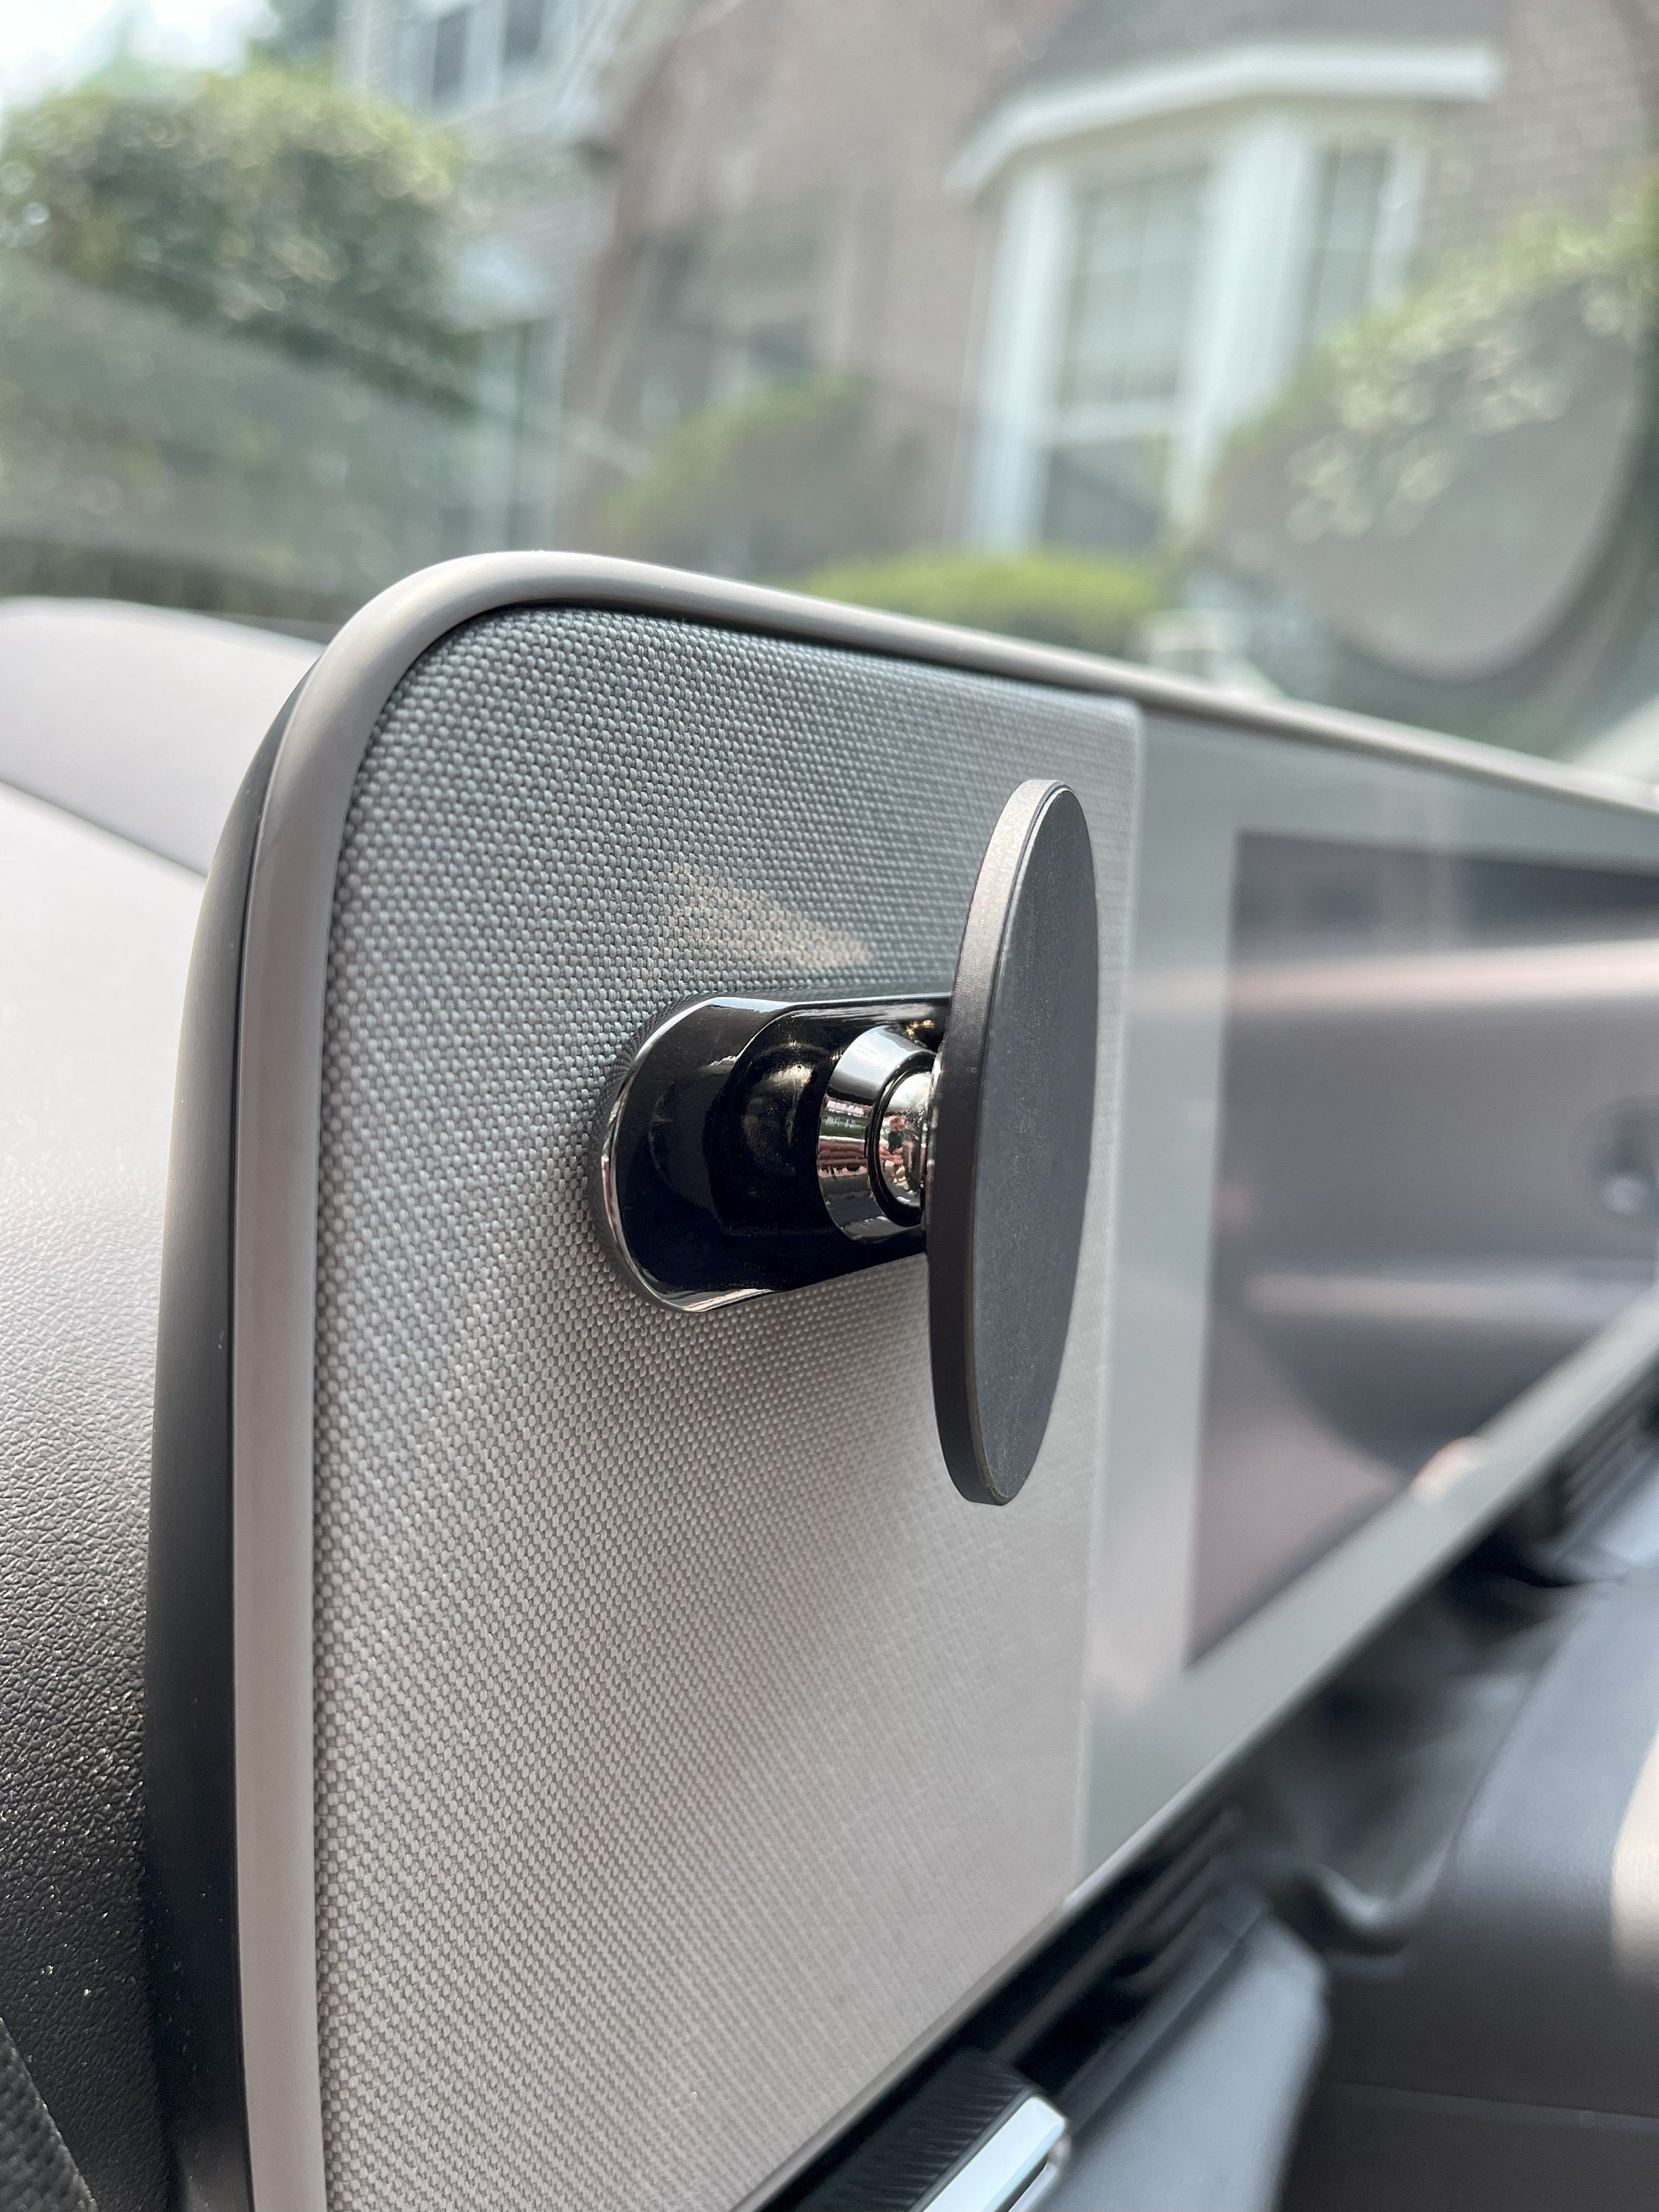 IPhone Holder Mount for Hyundai Ioniq 5. Attaches Magnetically to Metallic  Dashboard. Compatible With Magsafe. for iPhone 12/13/14 Series. 